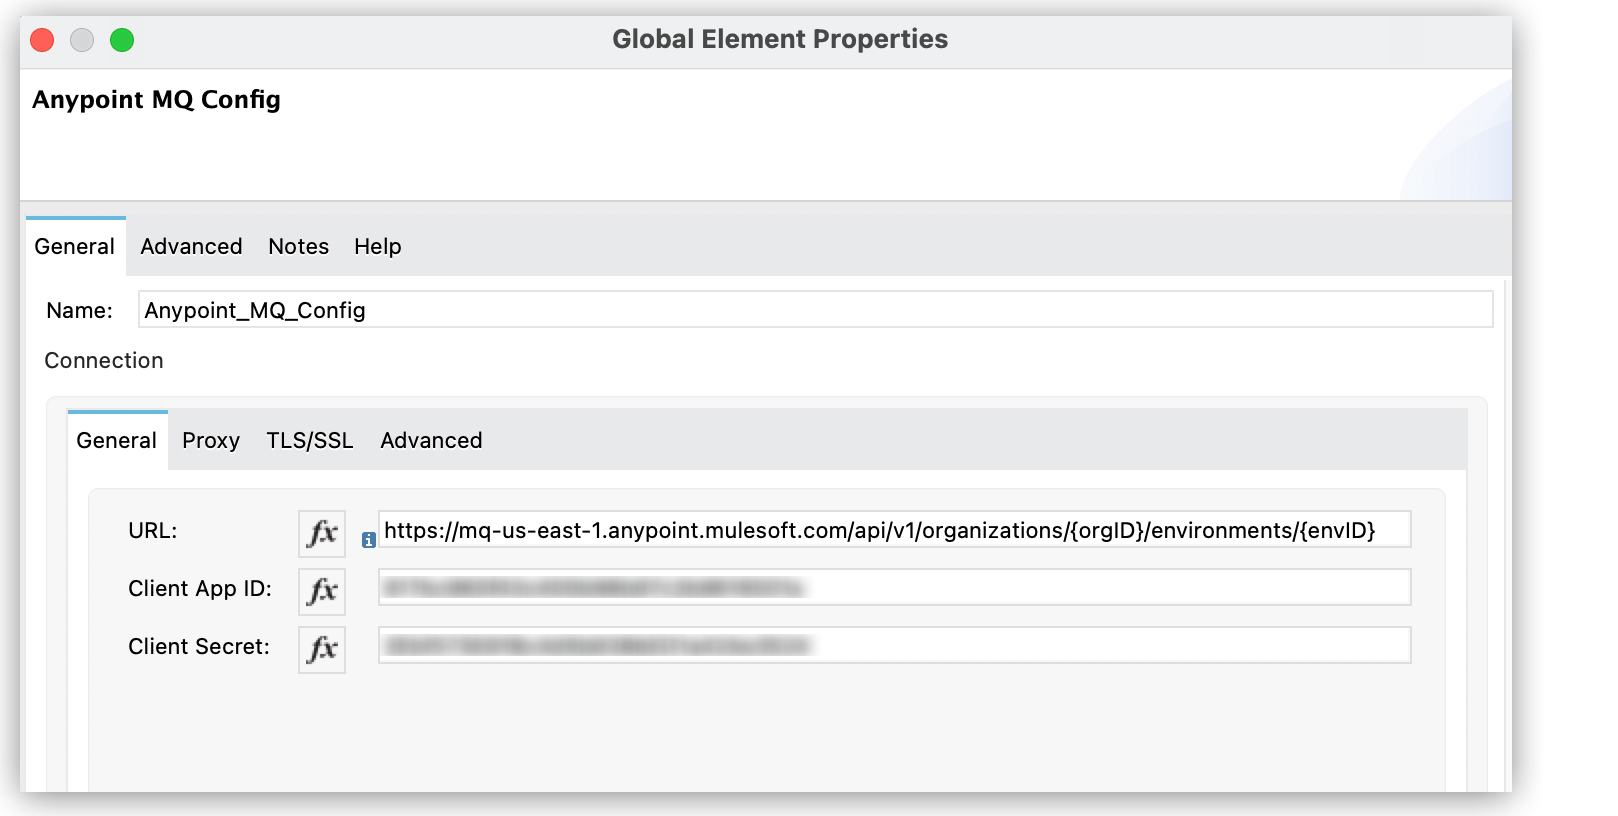 URL, Client App ID, and Client Secret fields in the Anypoint MQ Config window